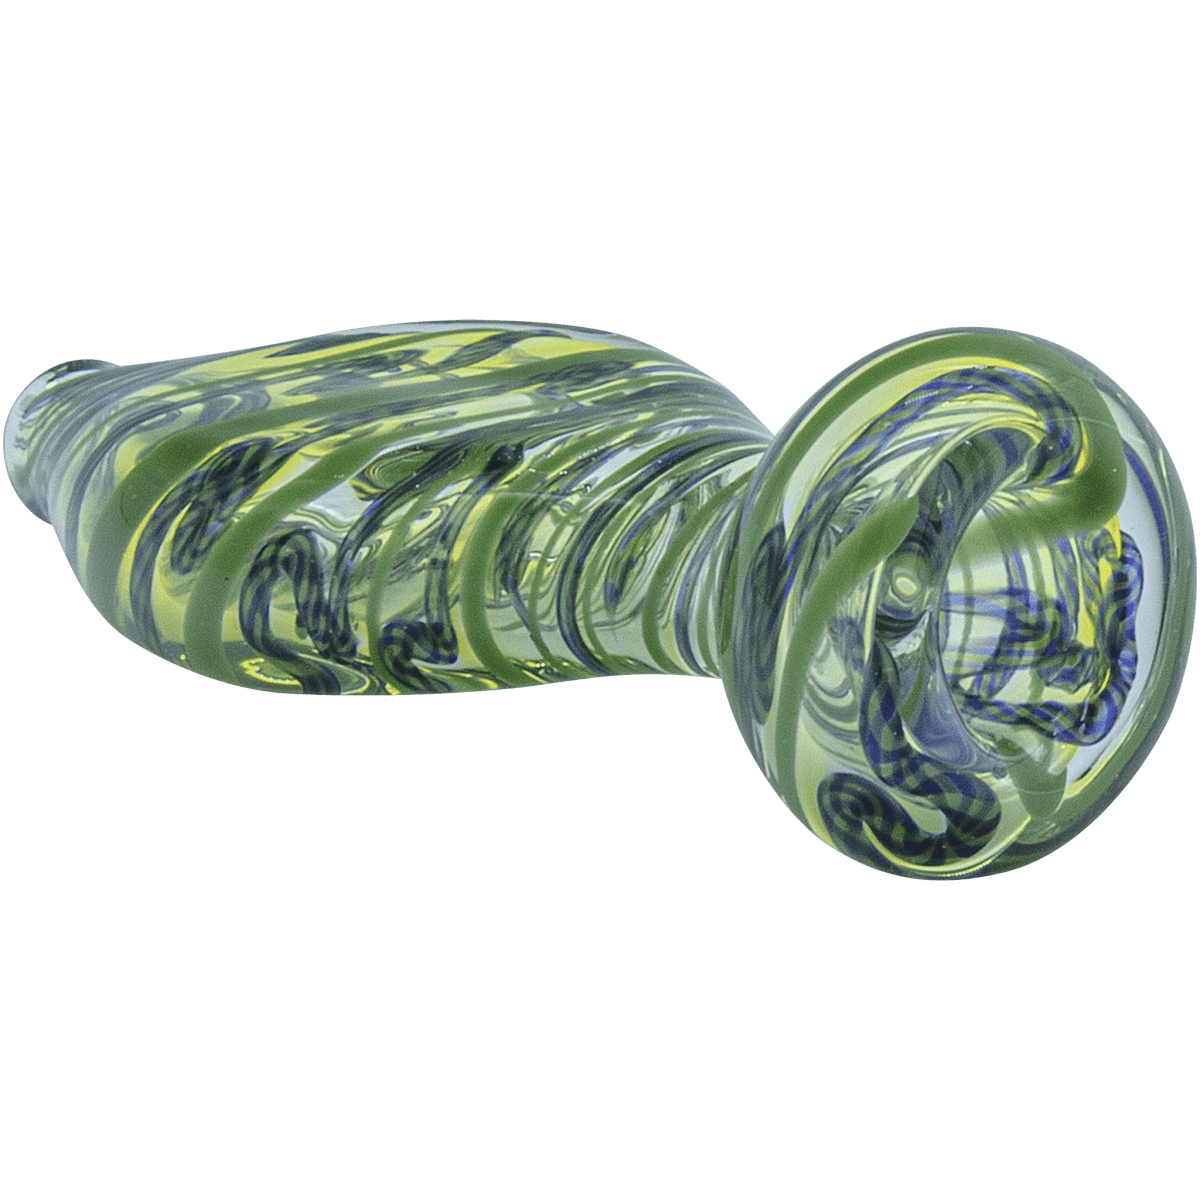 LA Pipes Hand Pipe "Flat Belly" Inside-Out Chillum